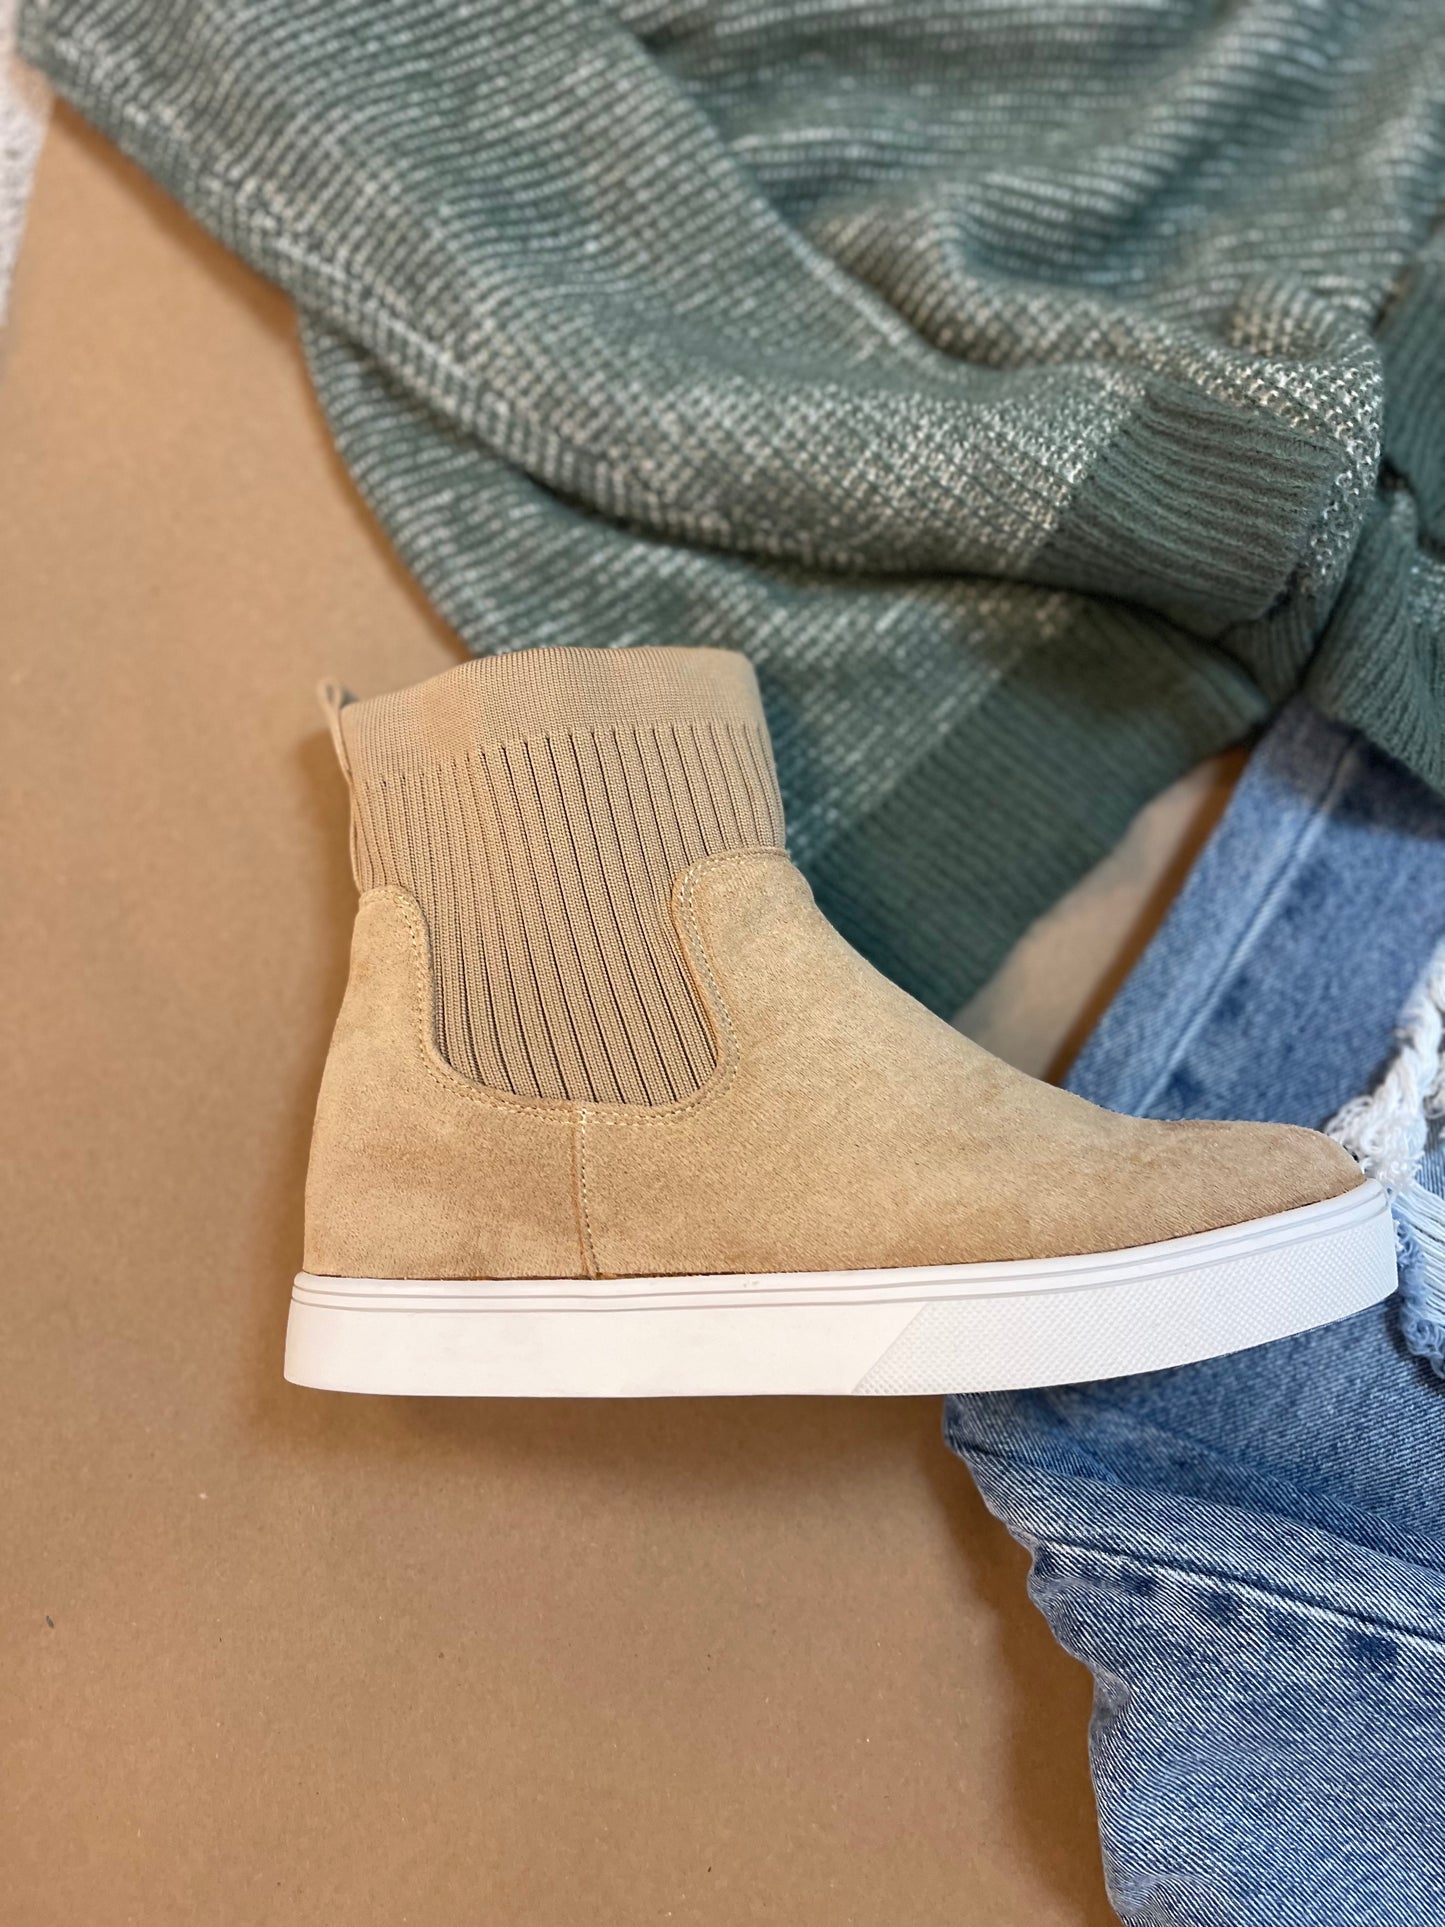 Sweater Weather Boot